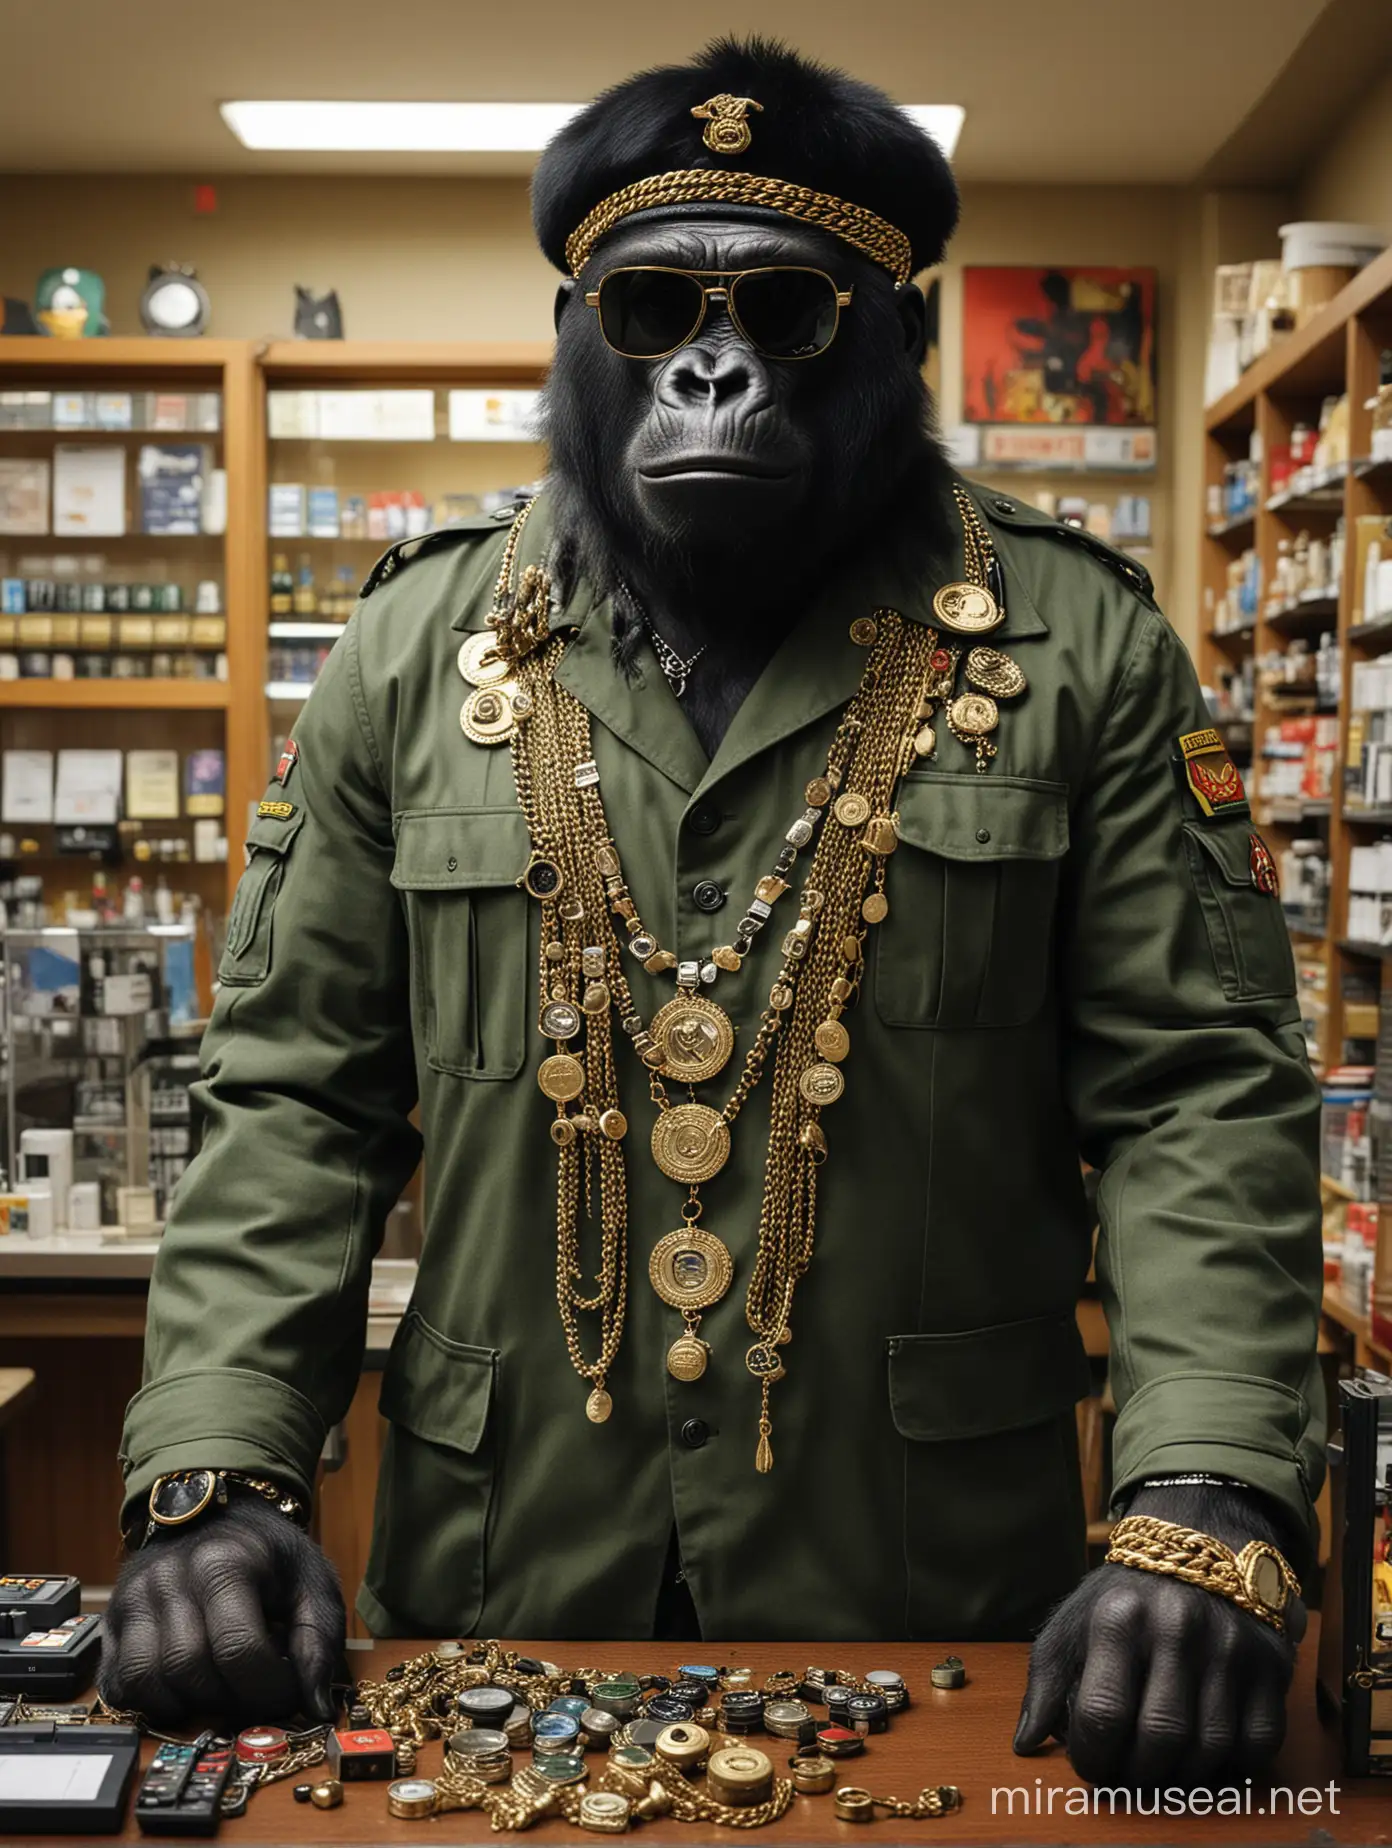 Defiant Gorilla in Military Attire Stands in Pharmacy with Roland 808 Drum Machine